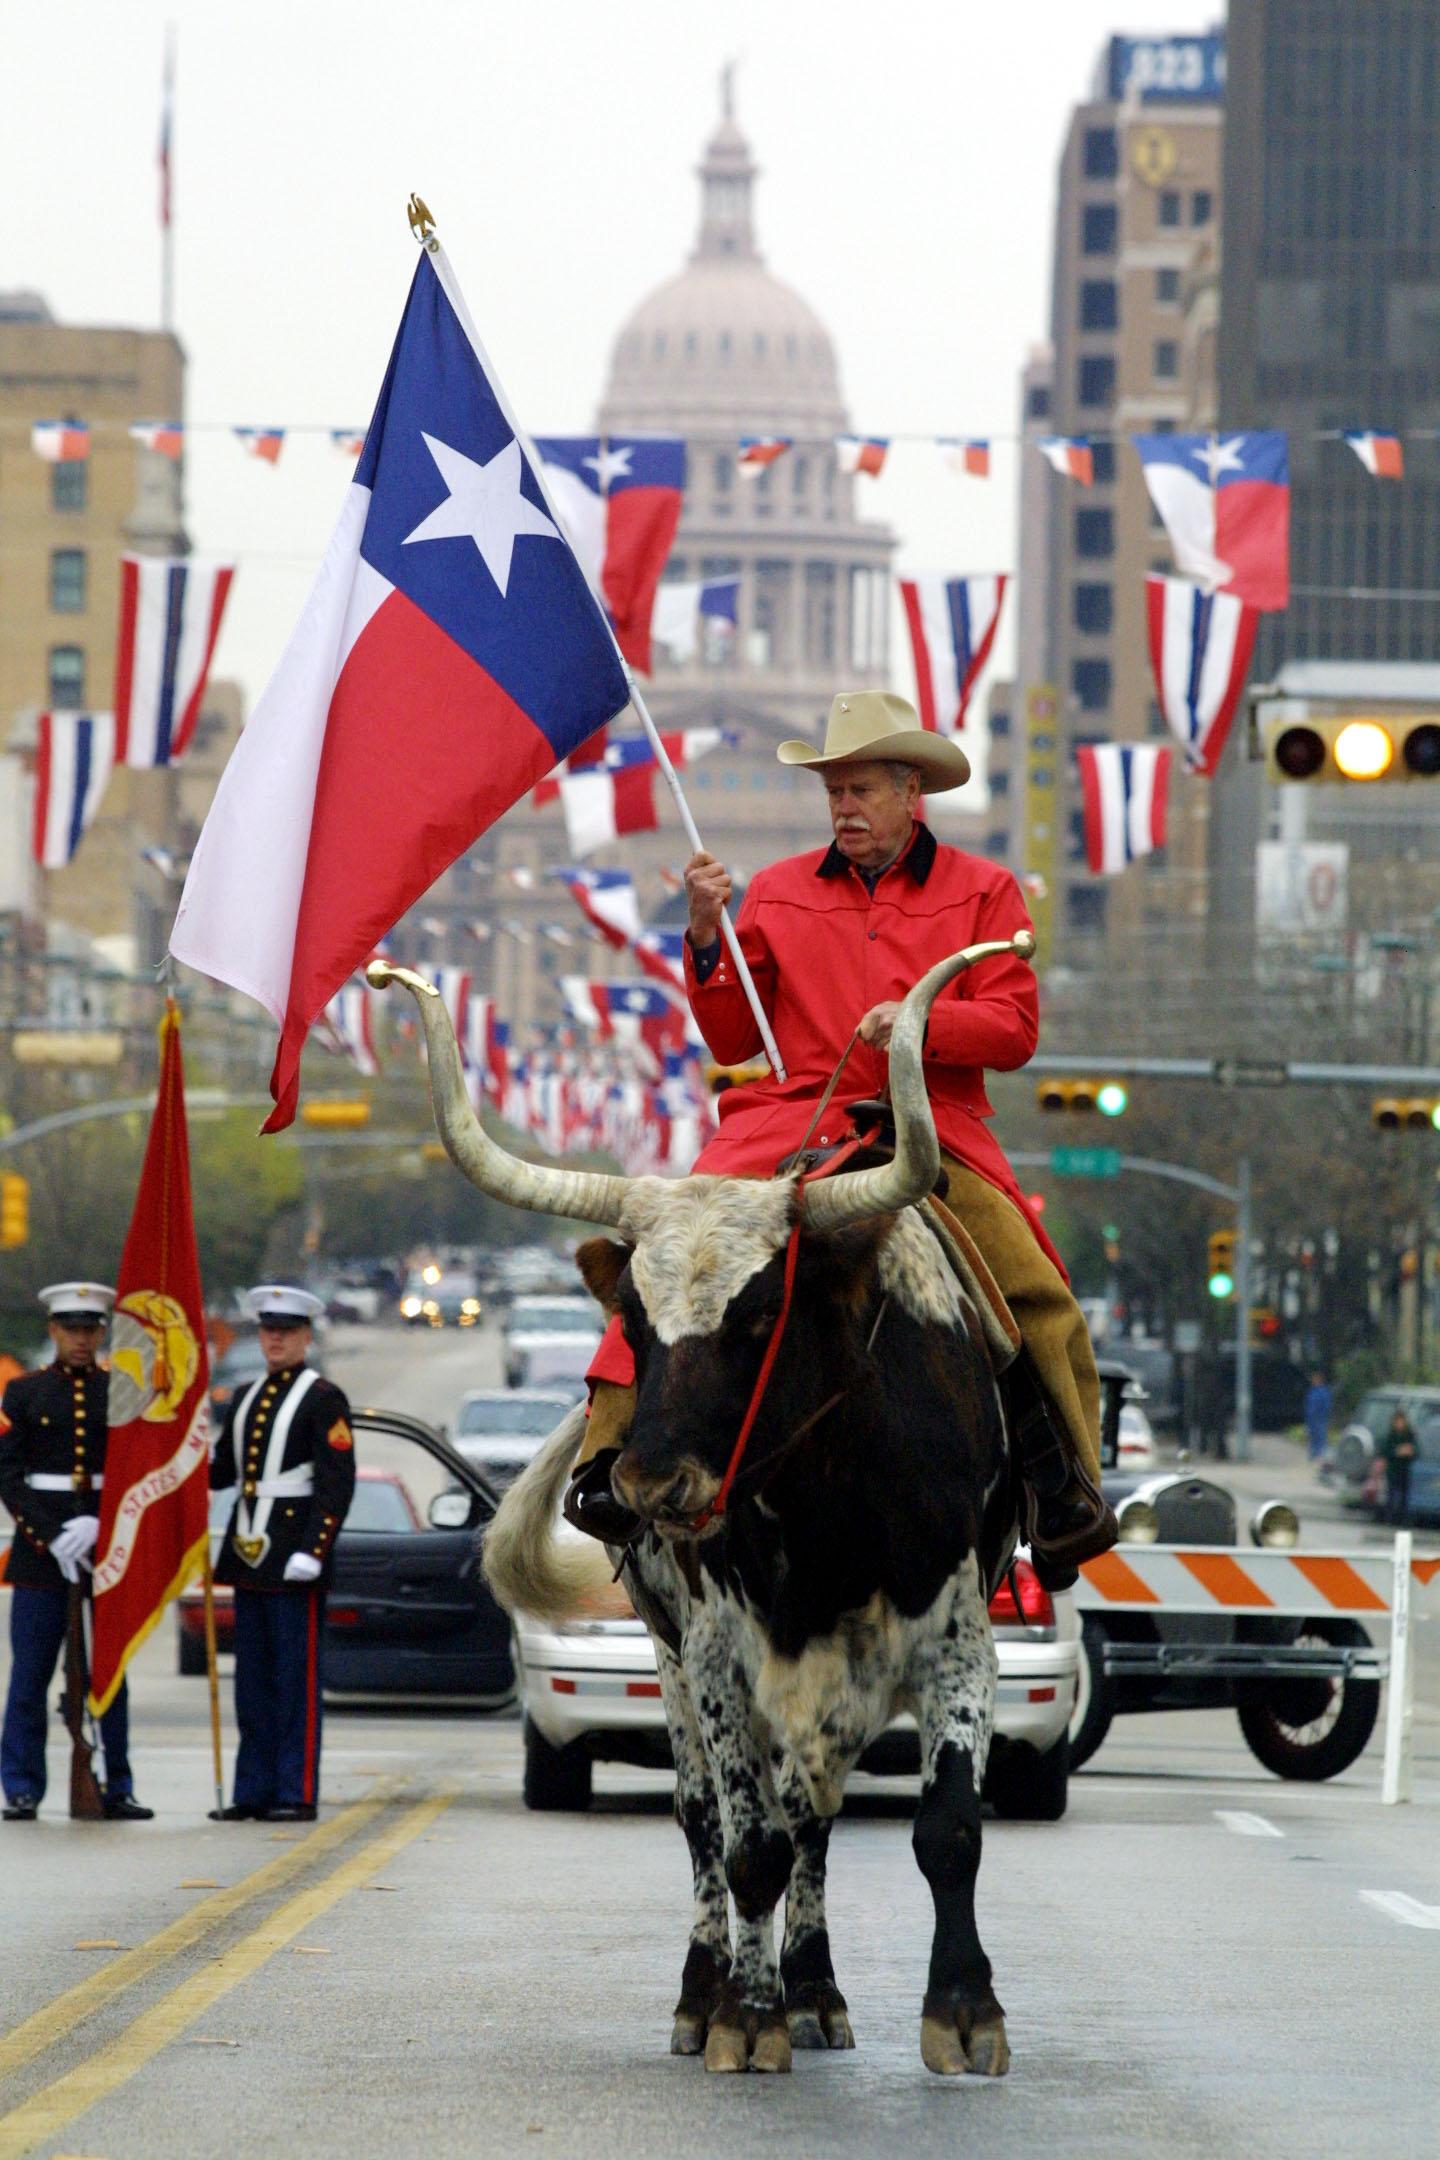 Celebrating Texas Independence Day (from Mexico) in Austin